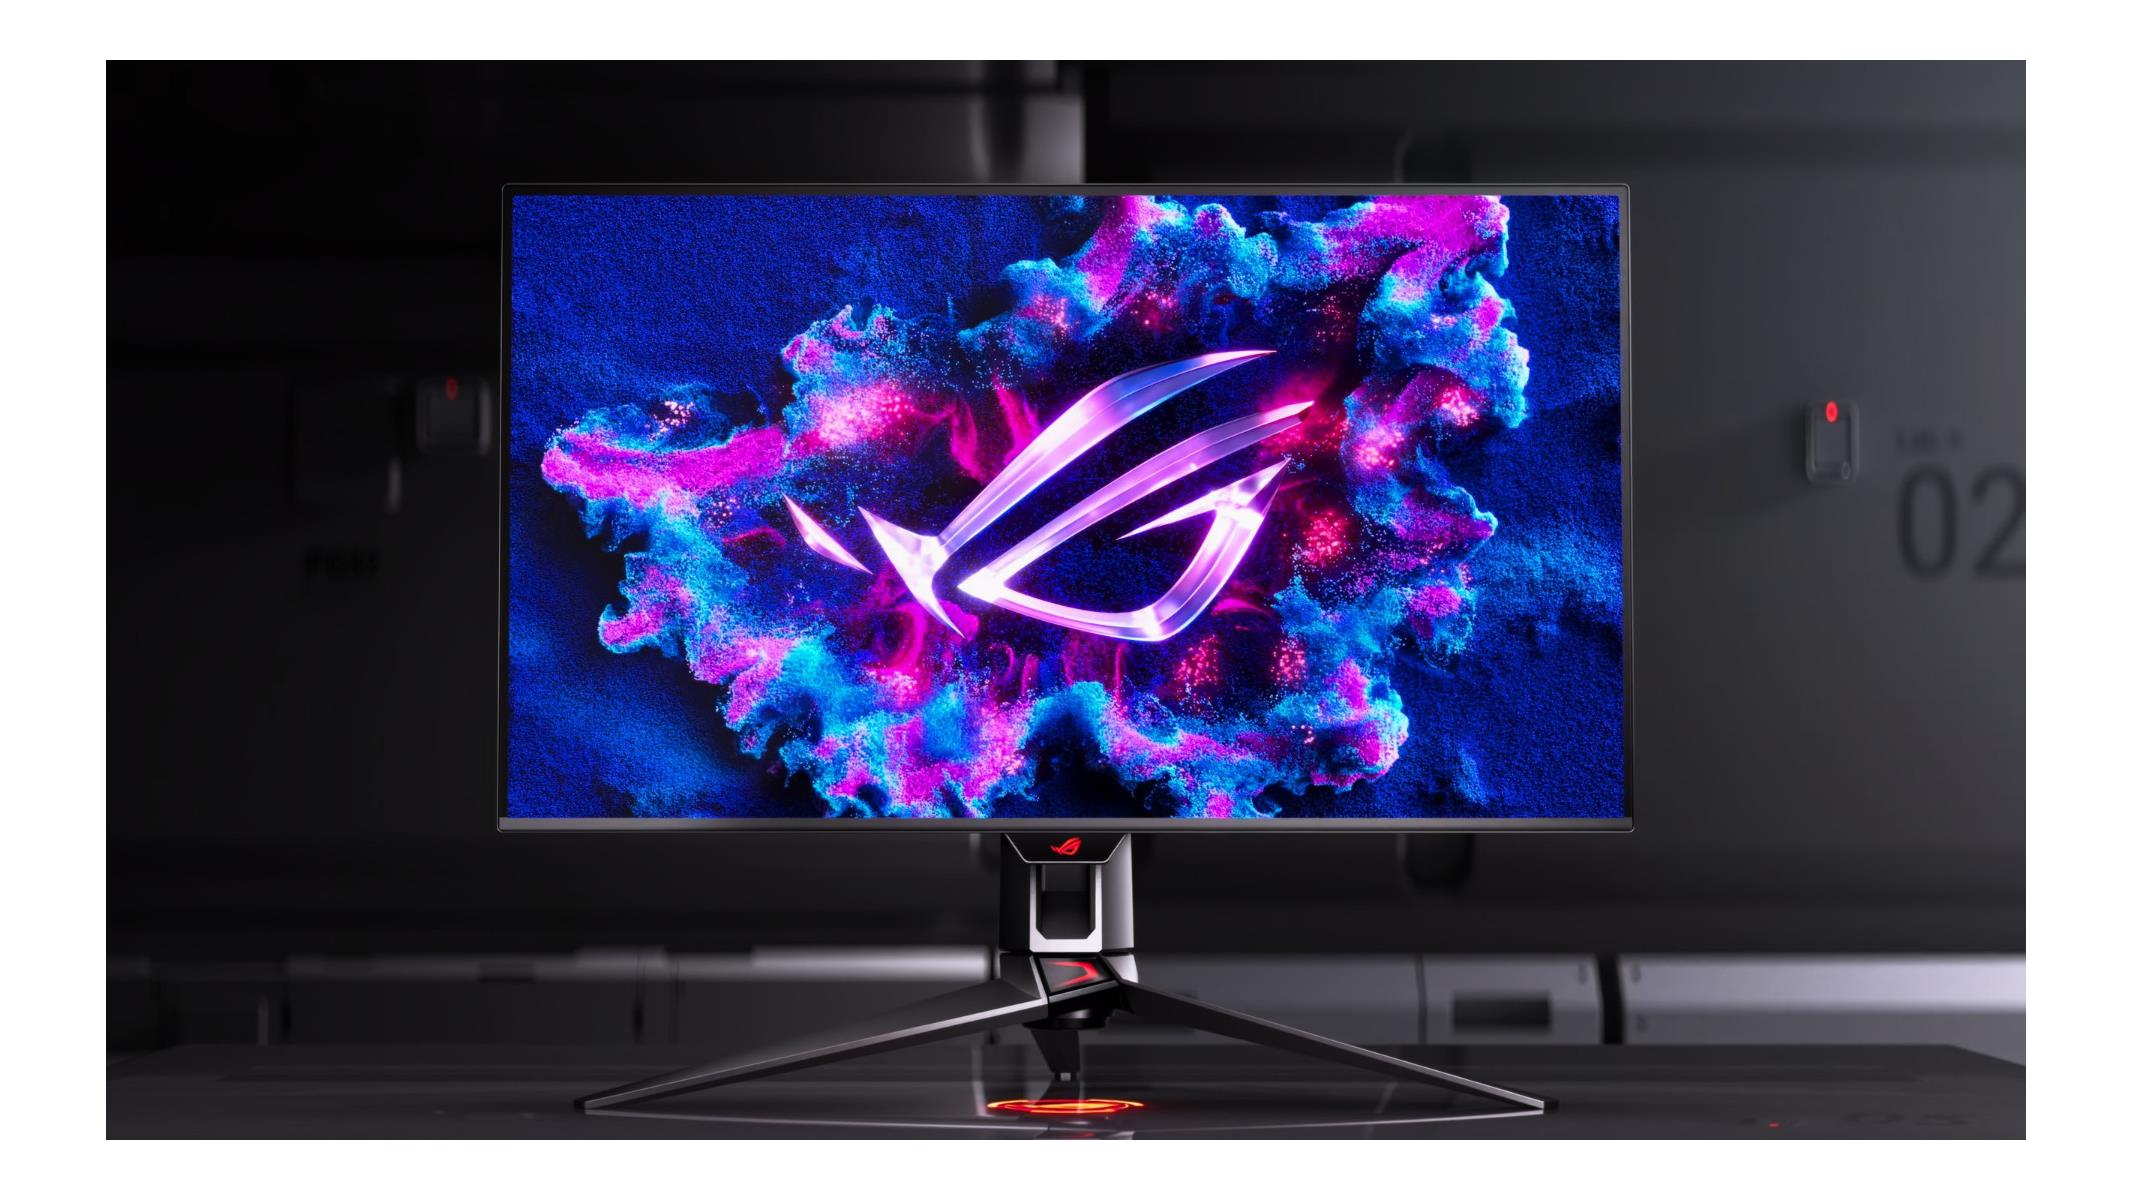 Asus reveals world's first 32-inch 4K OLED monitor, Z790